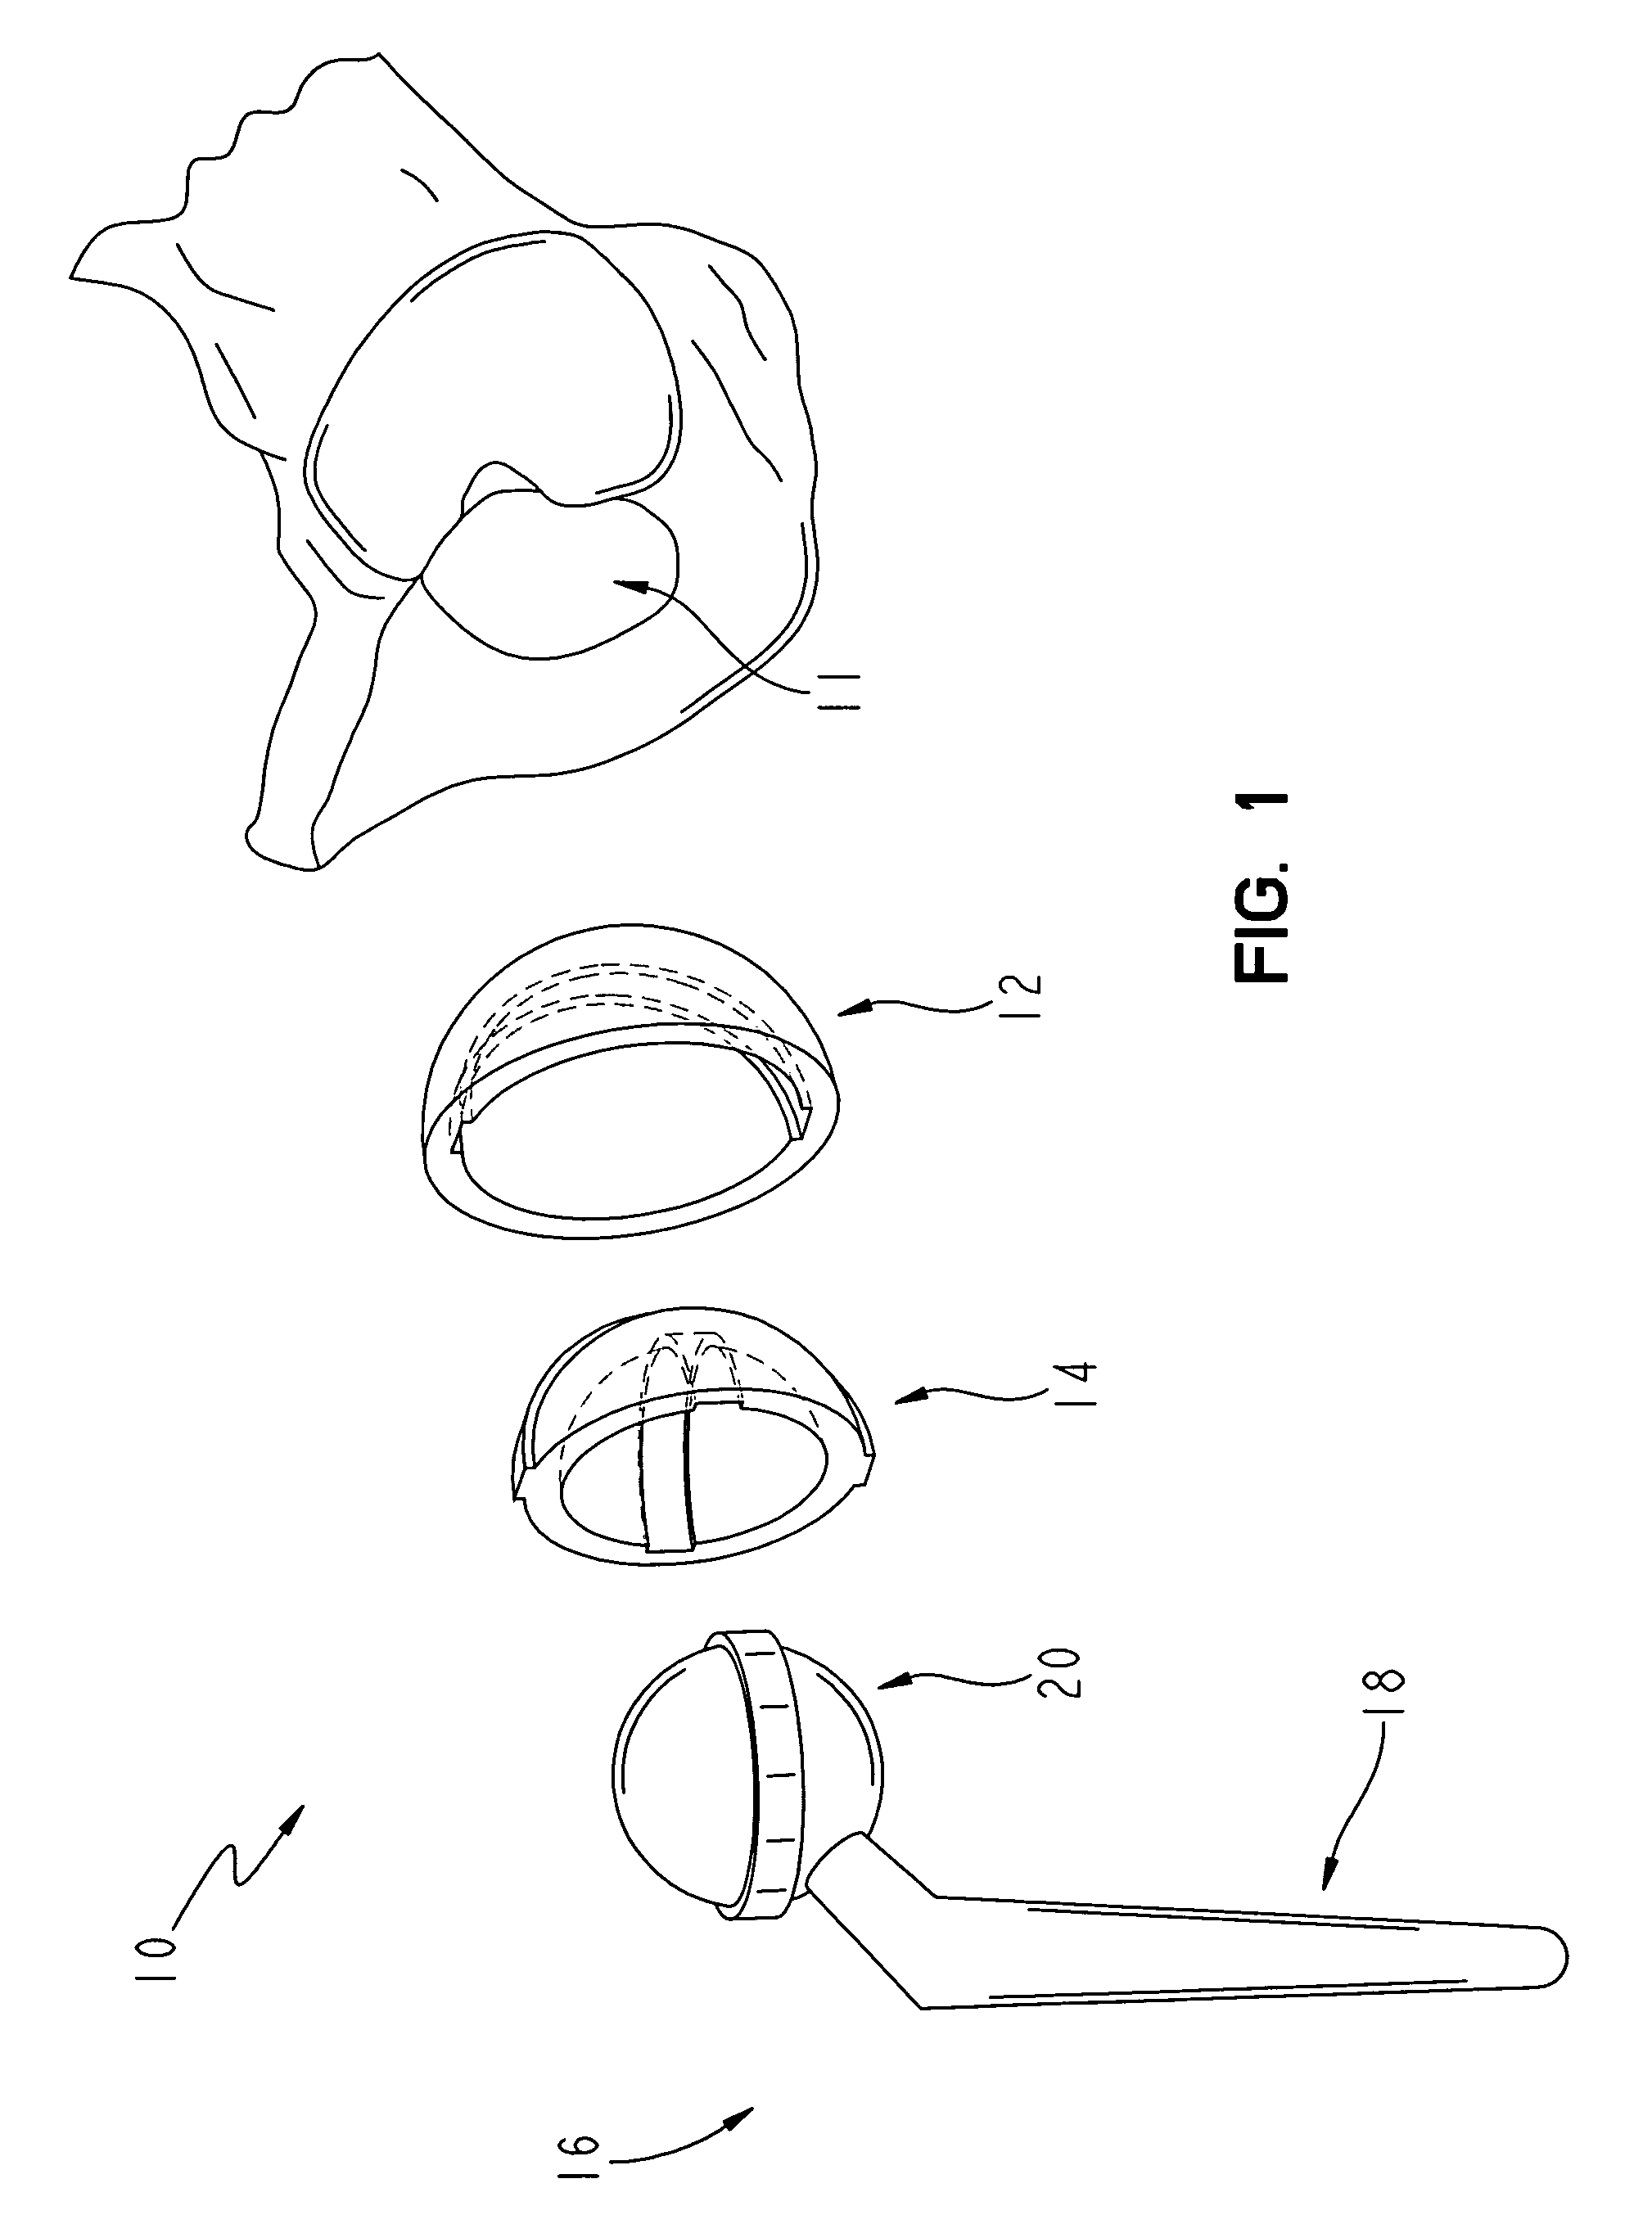 Reduced wear orthopaedic implant apparatus and method